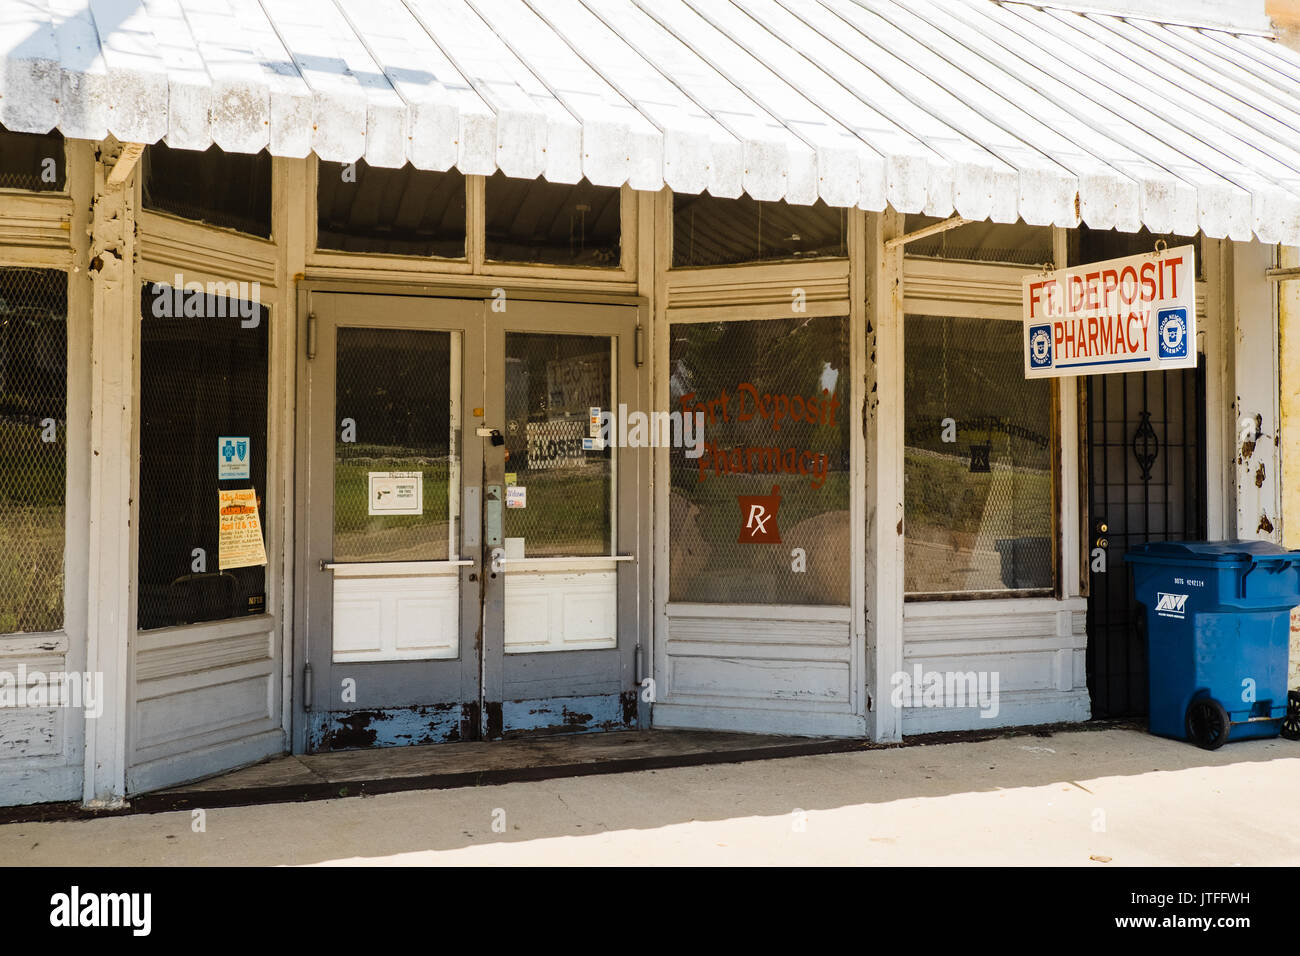 Closed pharmacy store front in the poor small rural town of Ft. Deposit Alabama, USA. Stock Photo